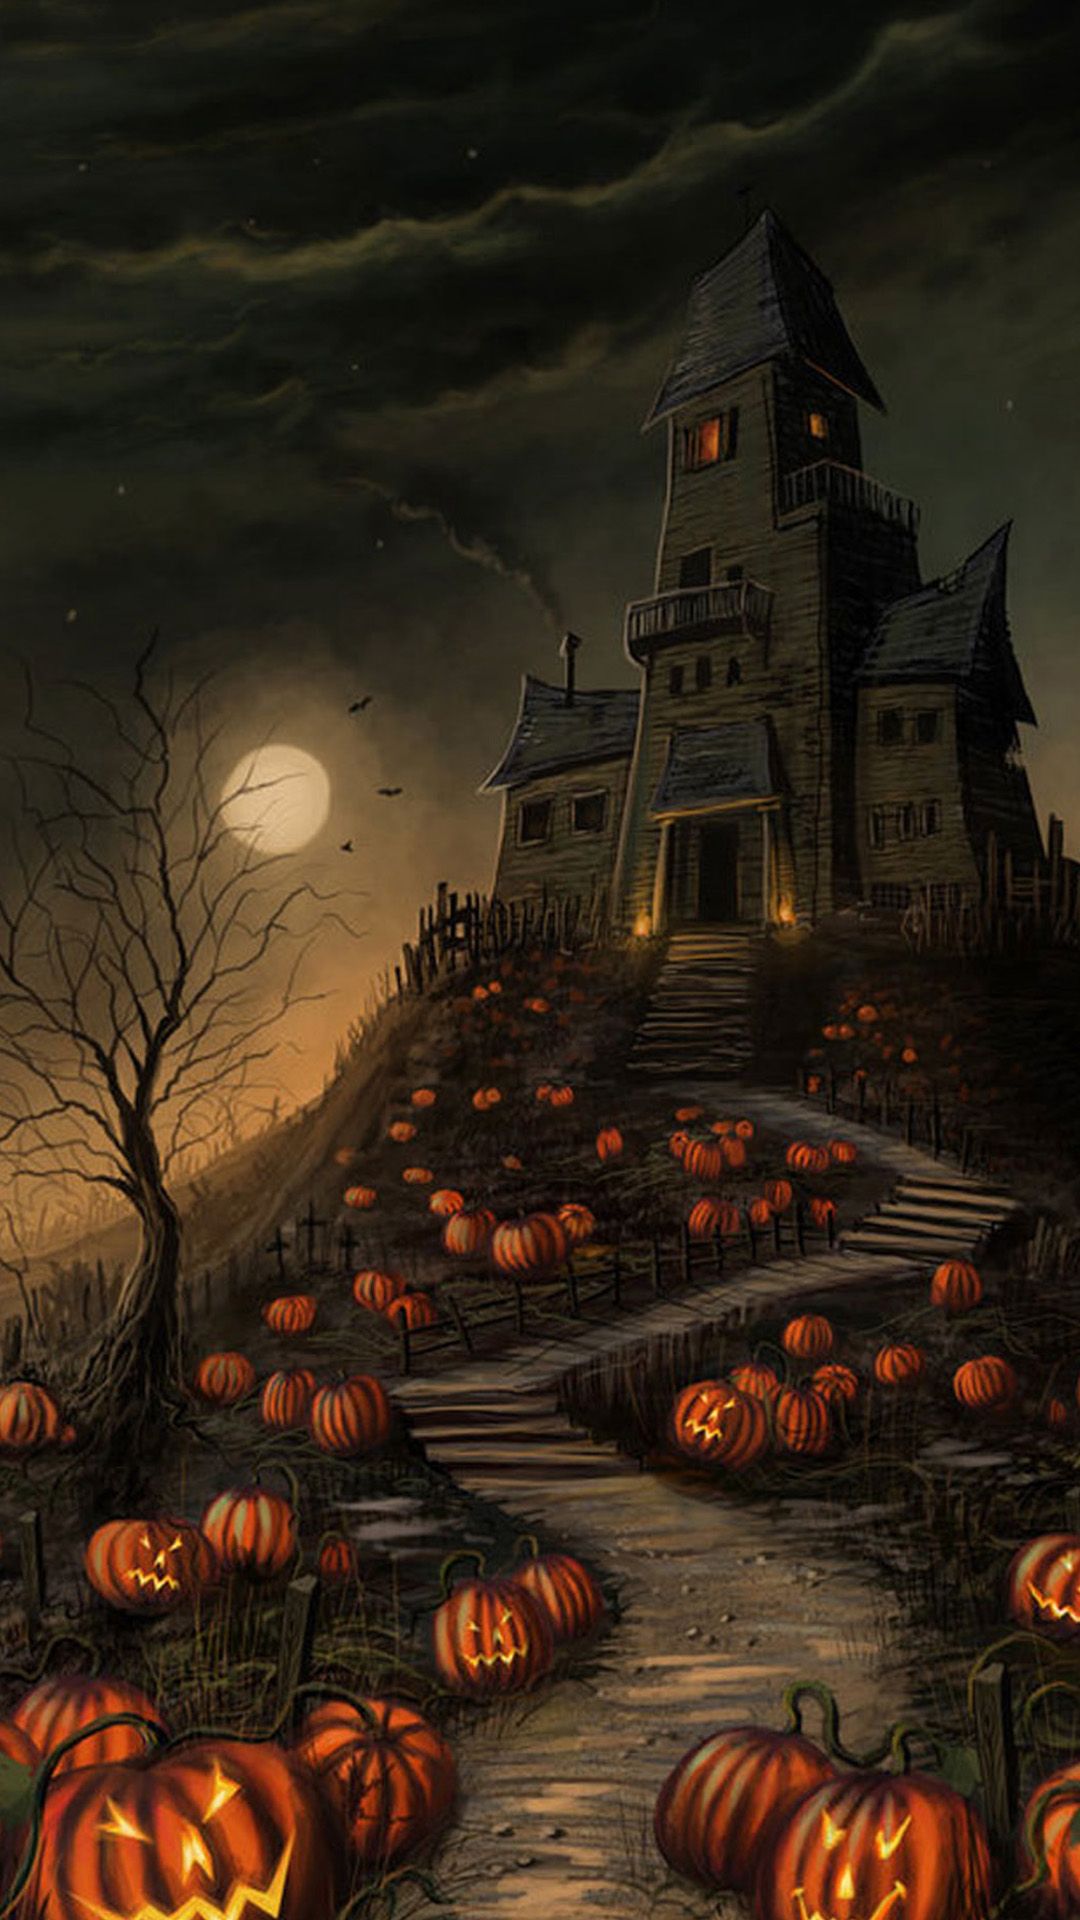 Happy Halloween Wallpaper for Mobile Phone with HD 1080x1920 Resolution Wallpaper. Wallpaper Download. High Resolution Wallpaper